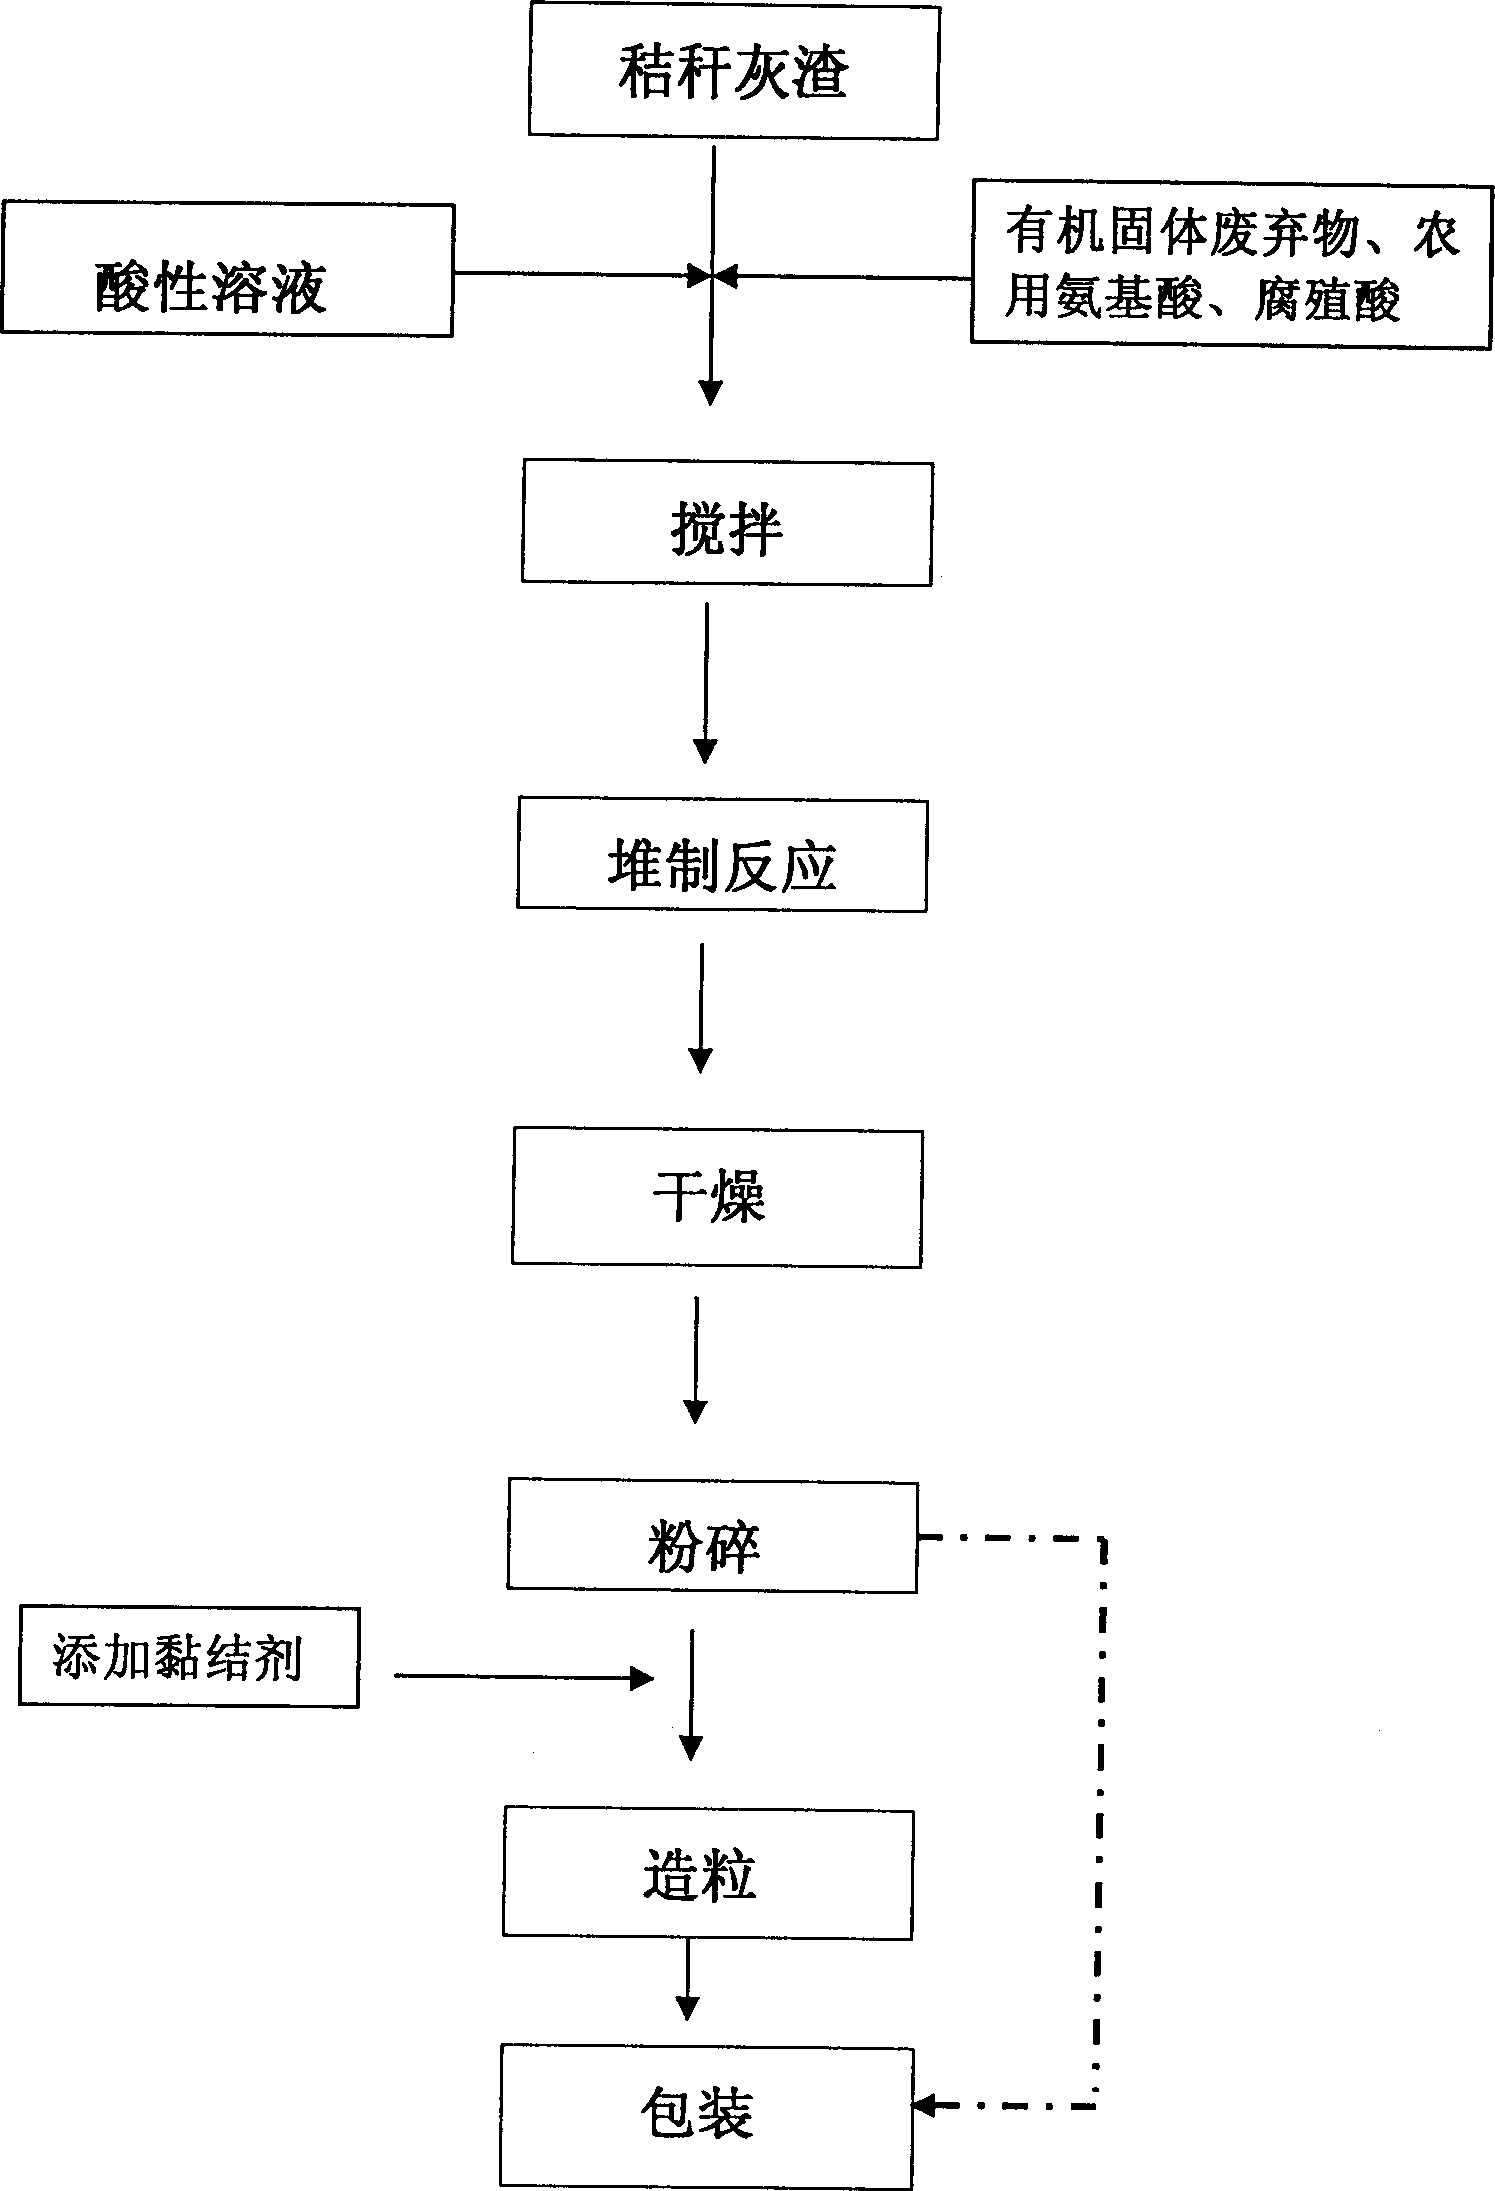 Process for producing multielement fertilizer by plant straw ash